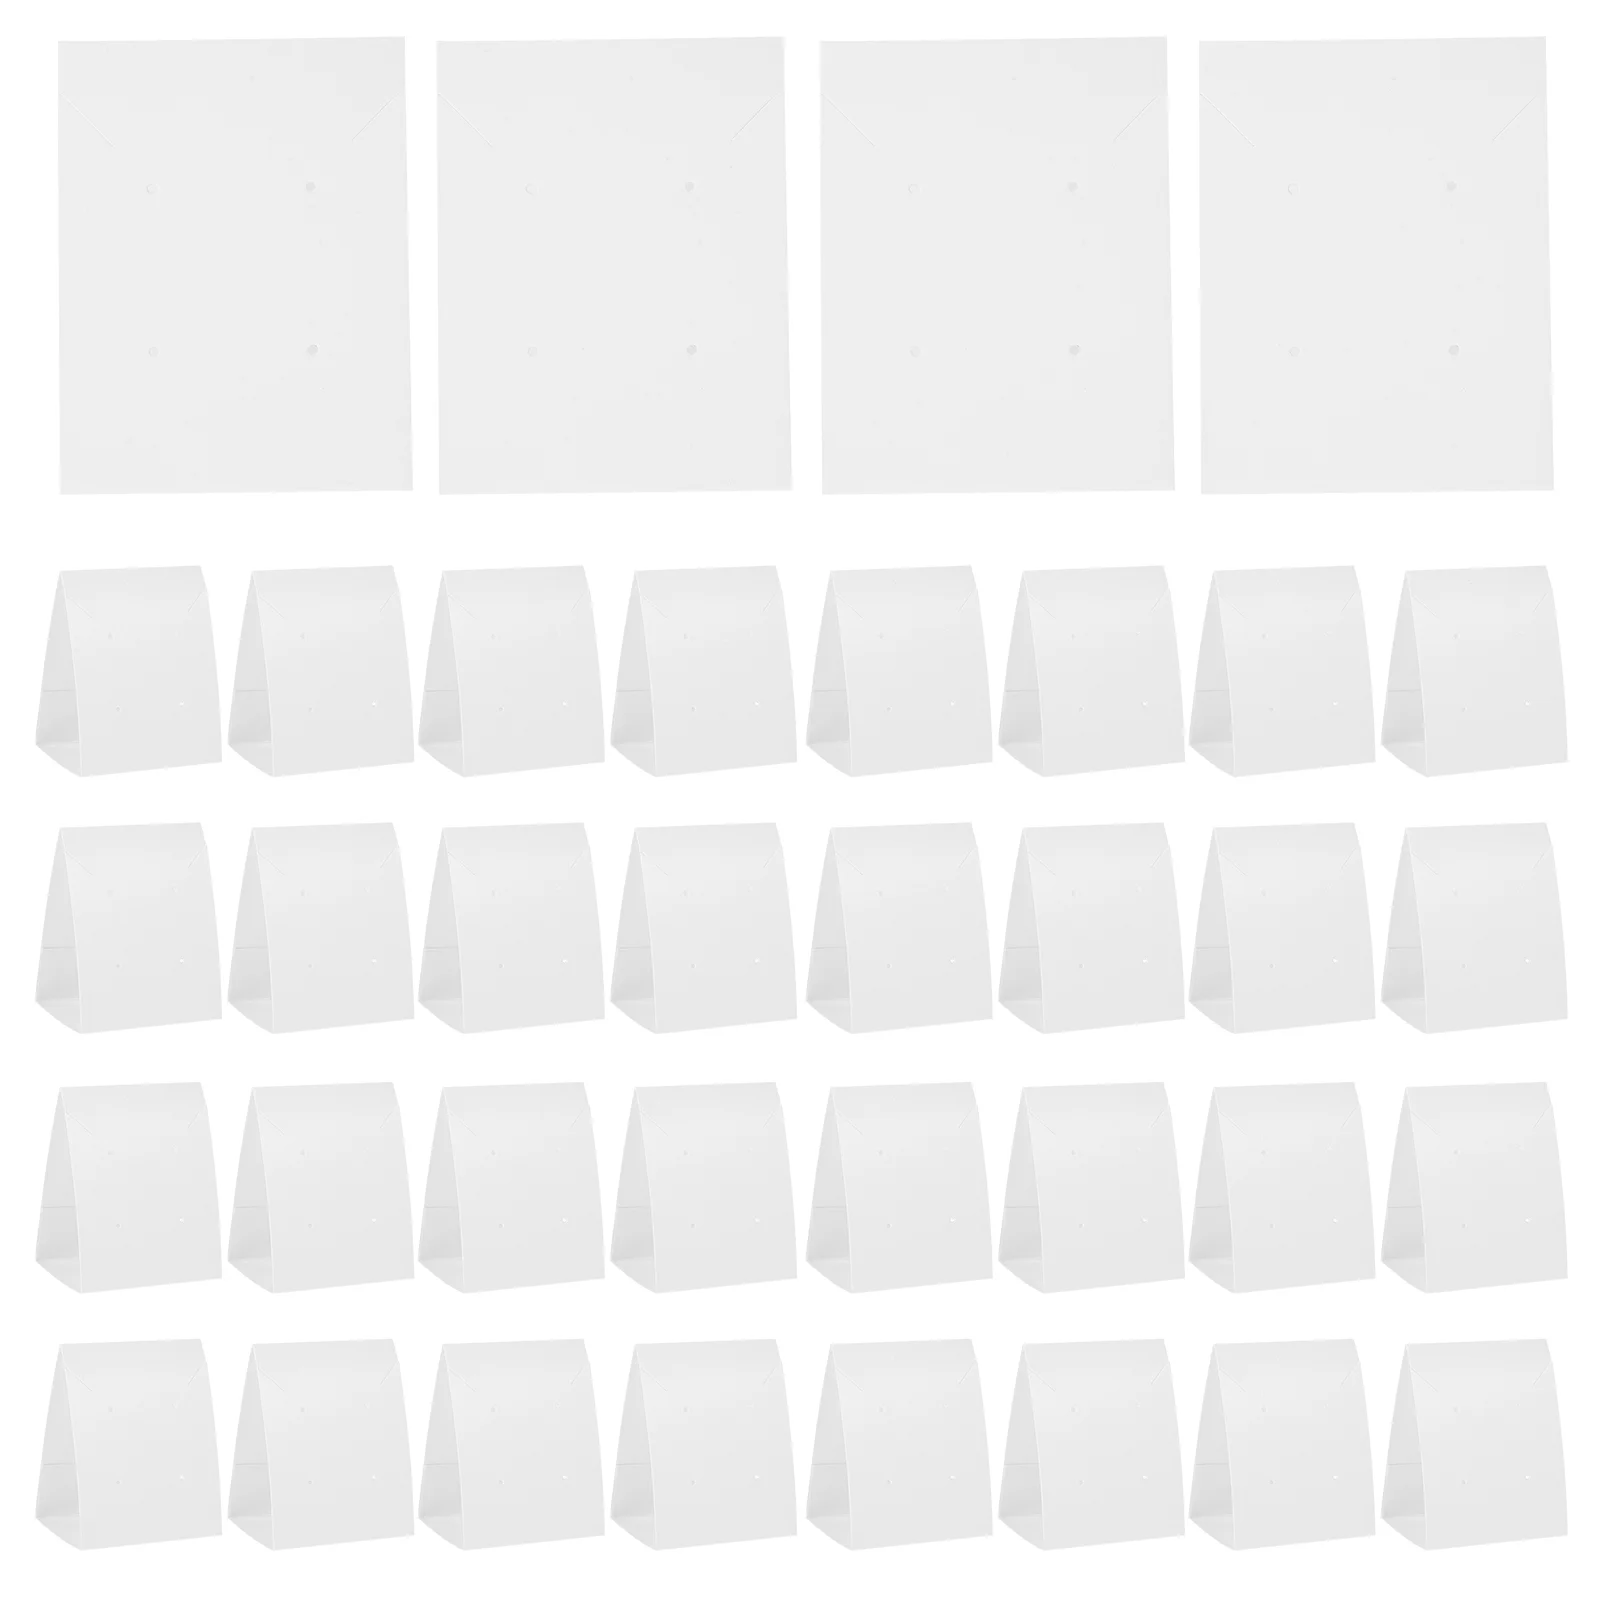 

100 Pcs Standing Earrings Necklace Display Cardboard Packaging Kraft Paper (White) 100pcs Holder Cards Jewelry Storage Wrapping